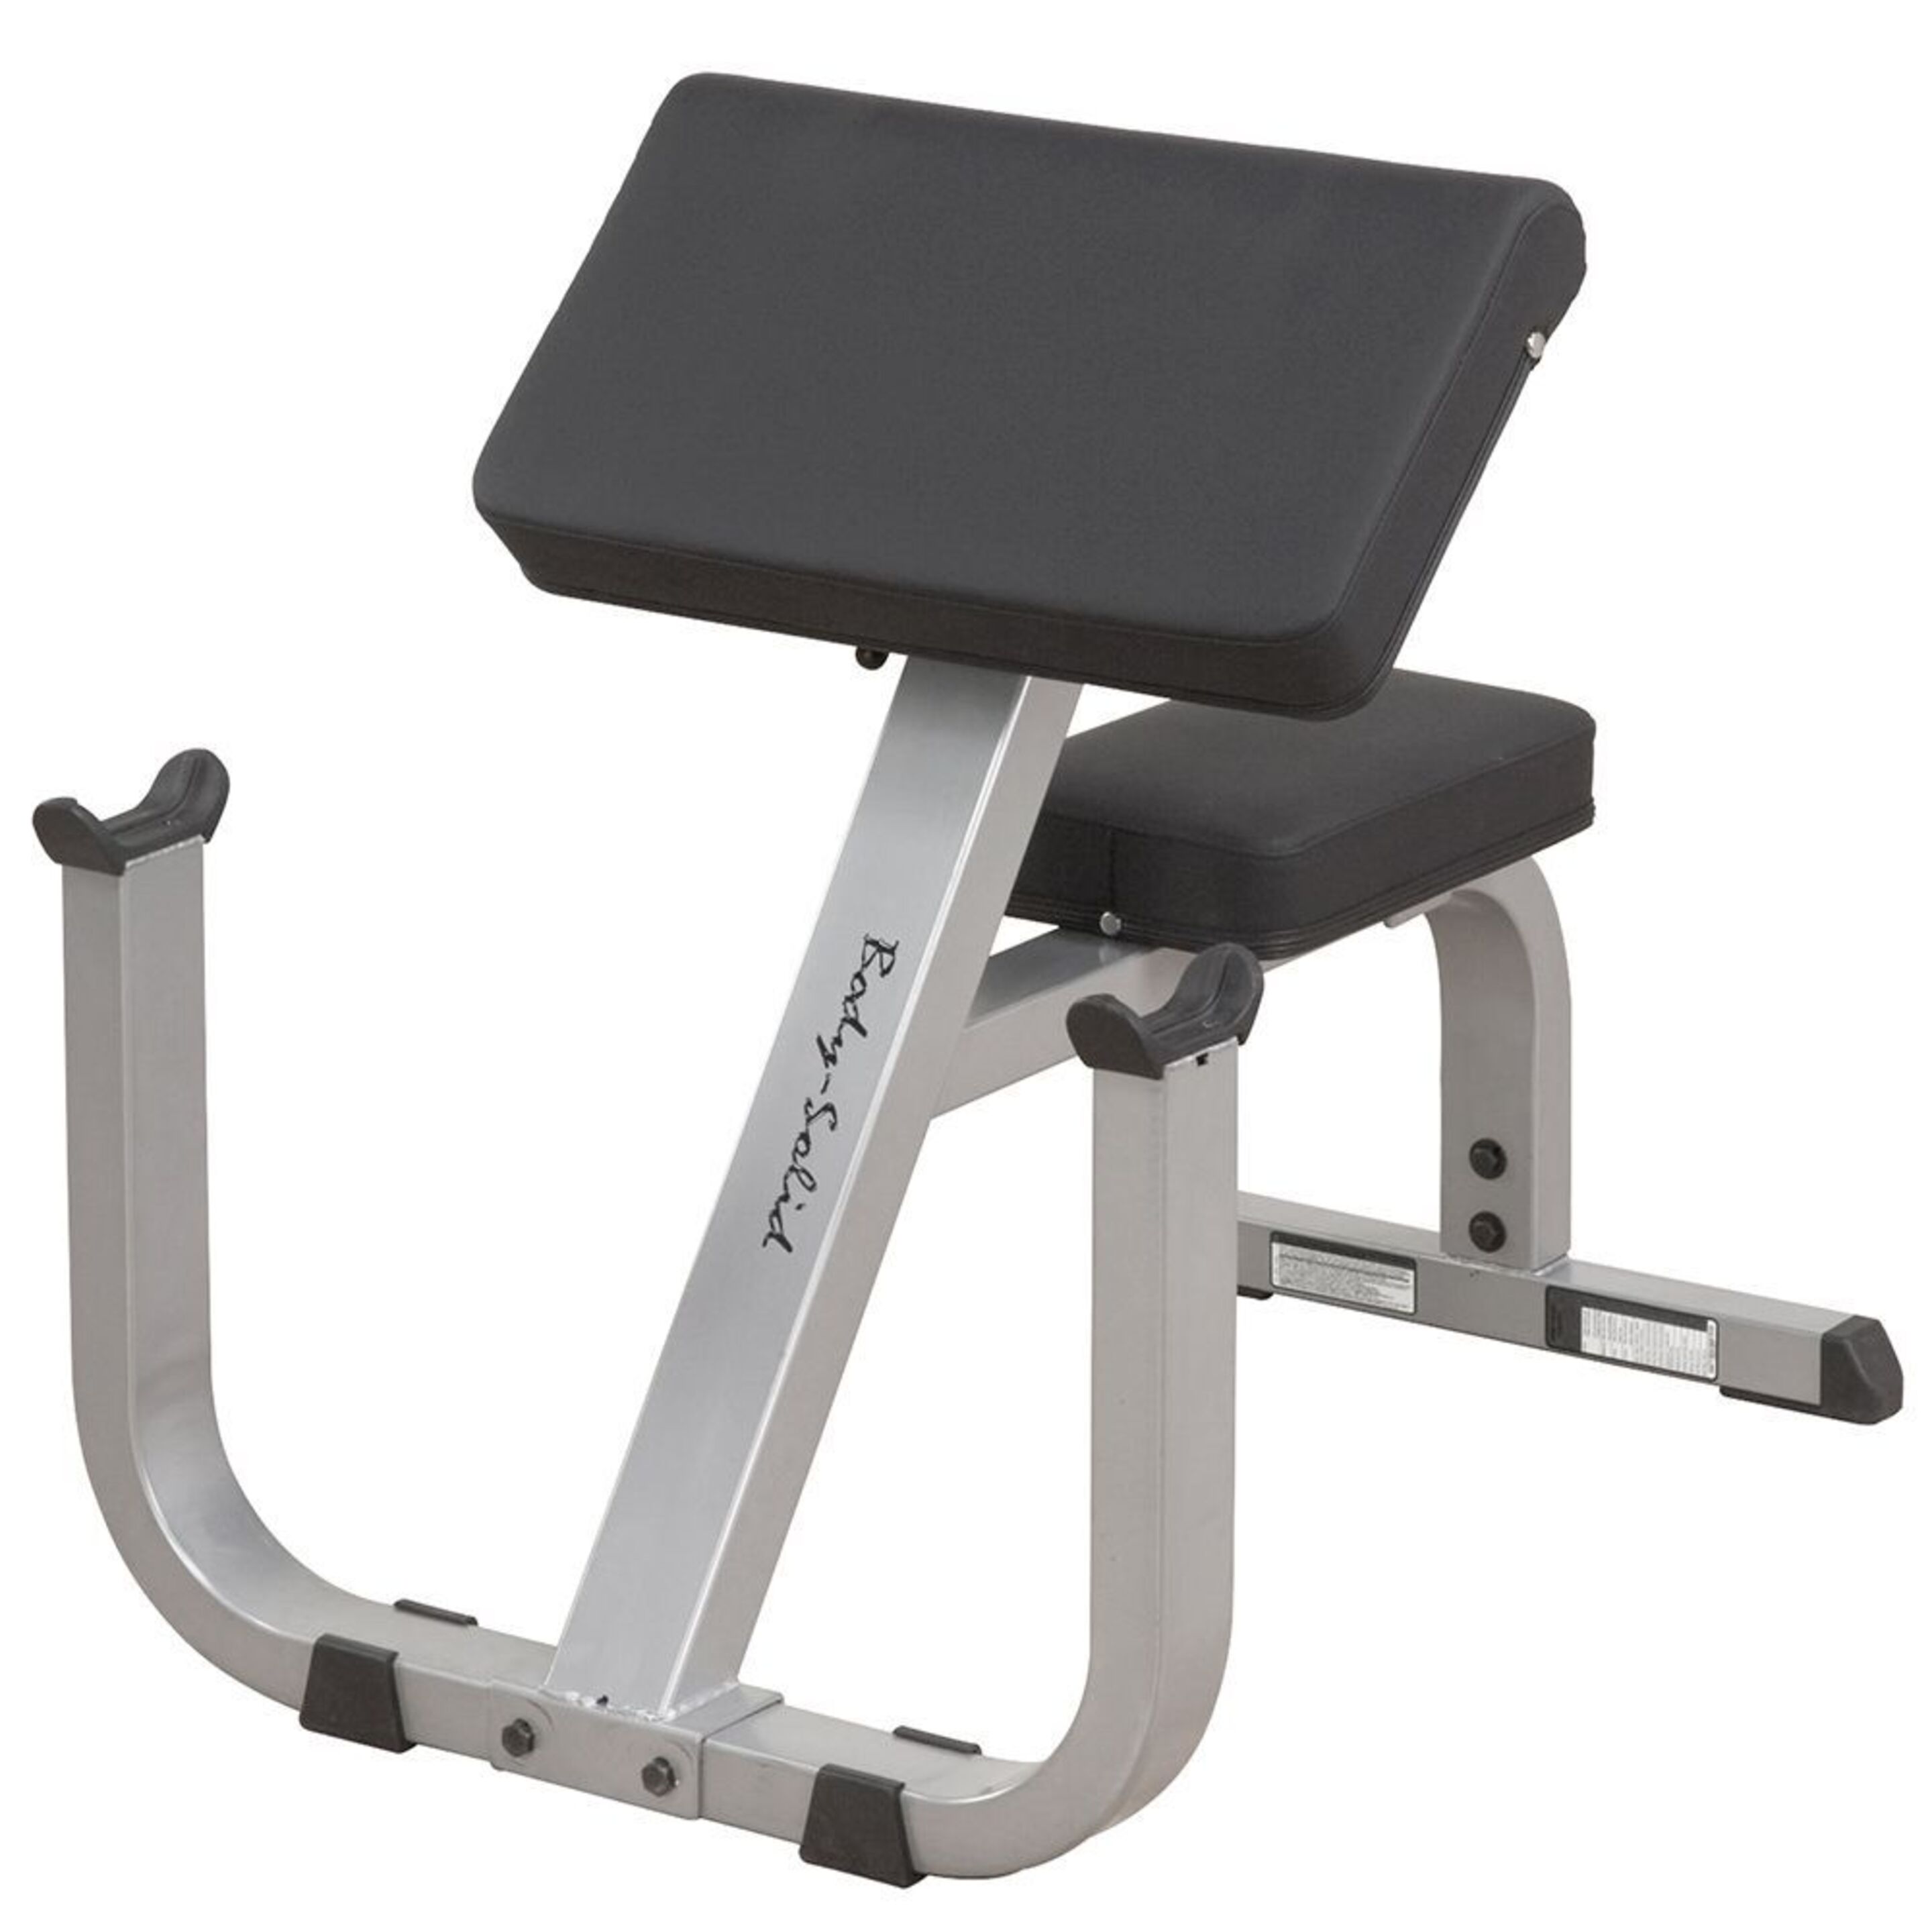 0preacher Curl Bench Body Solid  Gpcb329 - gris - 